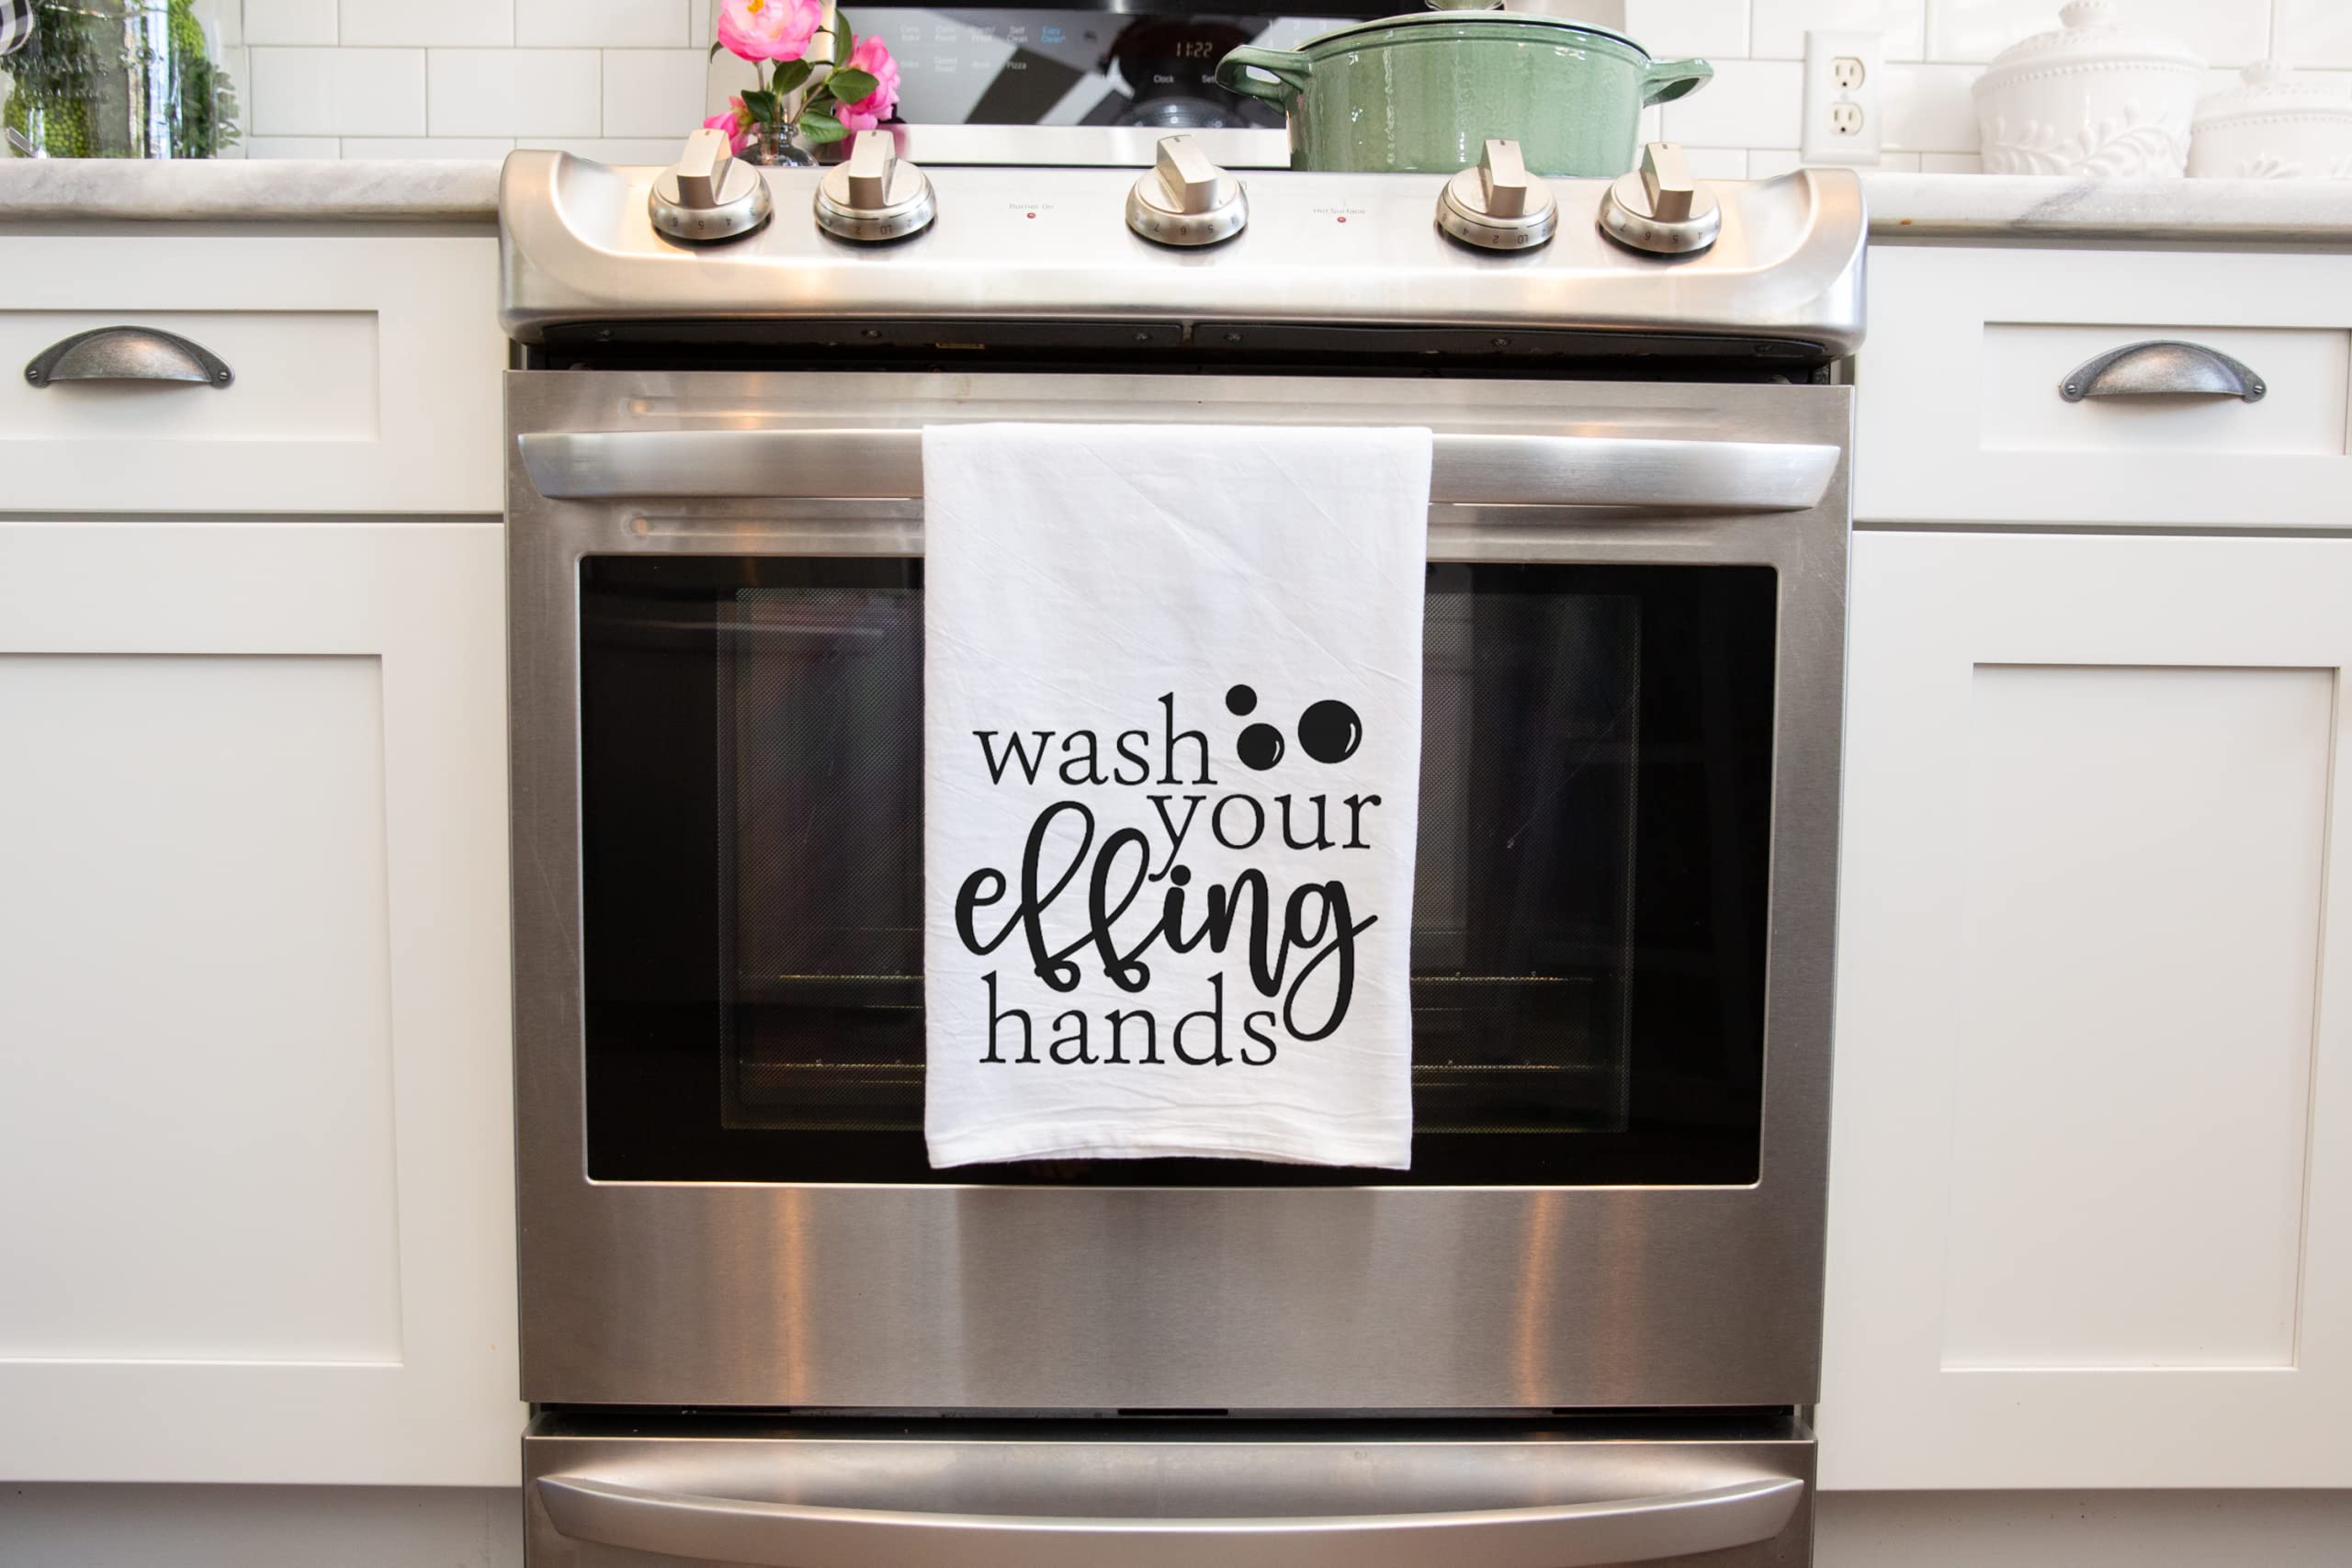 Handmade Funny Bathroom Towel - 100% Cotton Funny Flour Sack Wash Your Hands Towel for Bath - 28x28 Inch Hostess Housewarming Christmas Mother’s Day Birthday Gift (Wash Your Effing Hands)